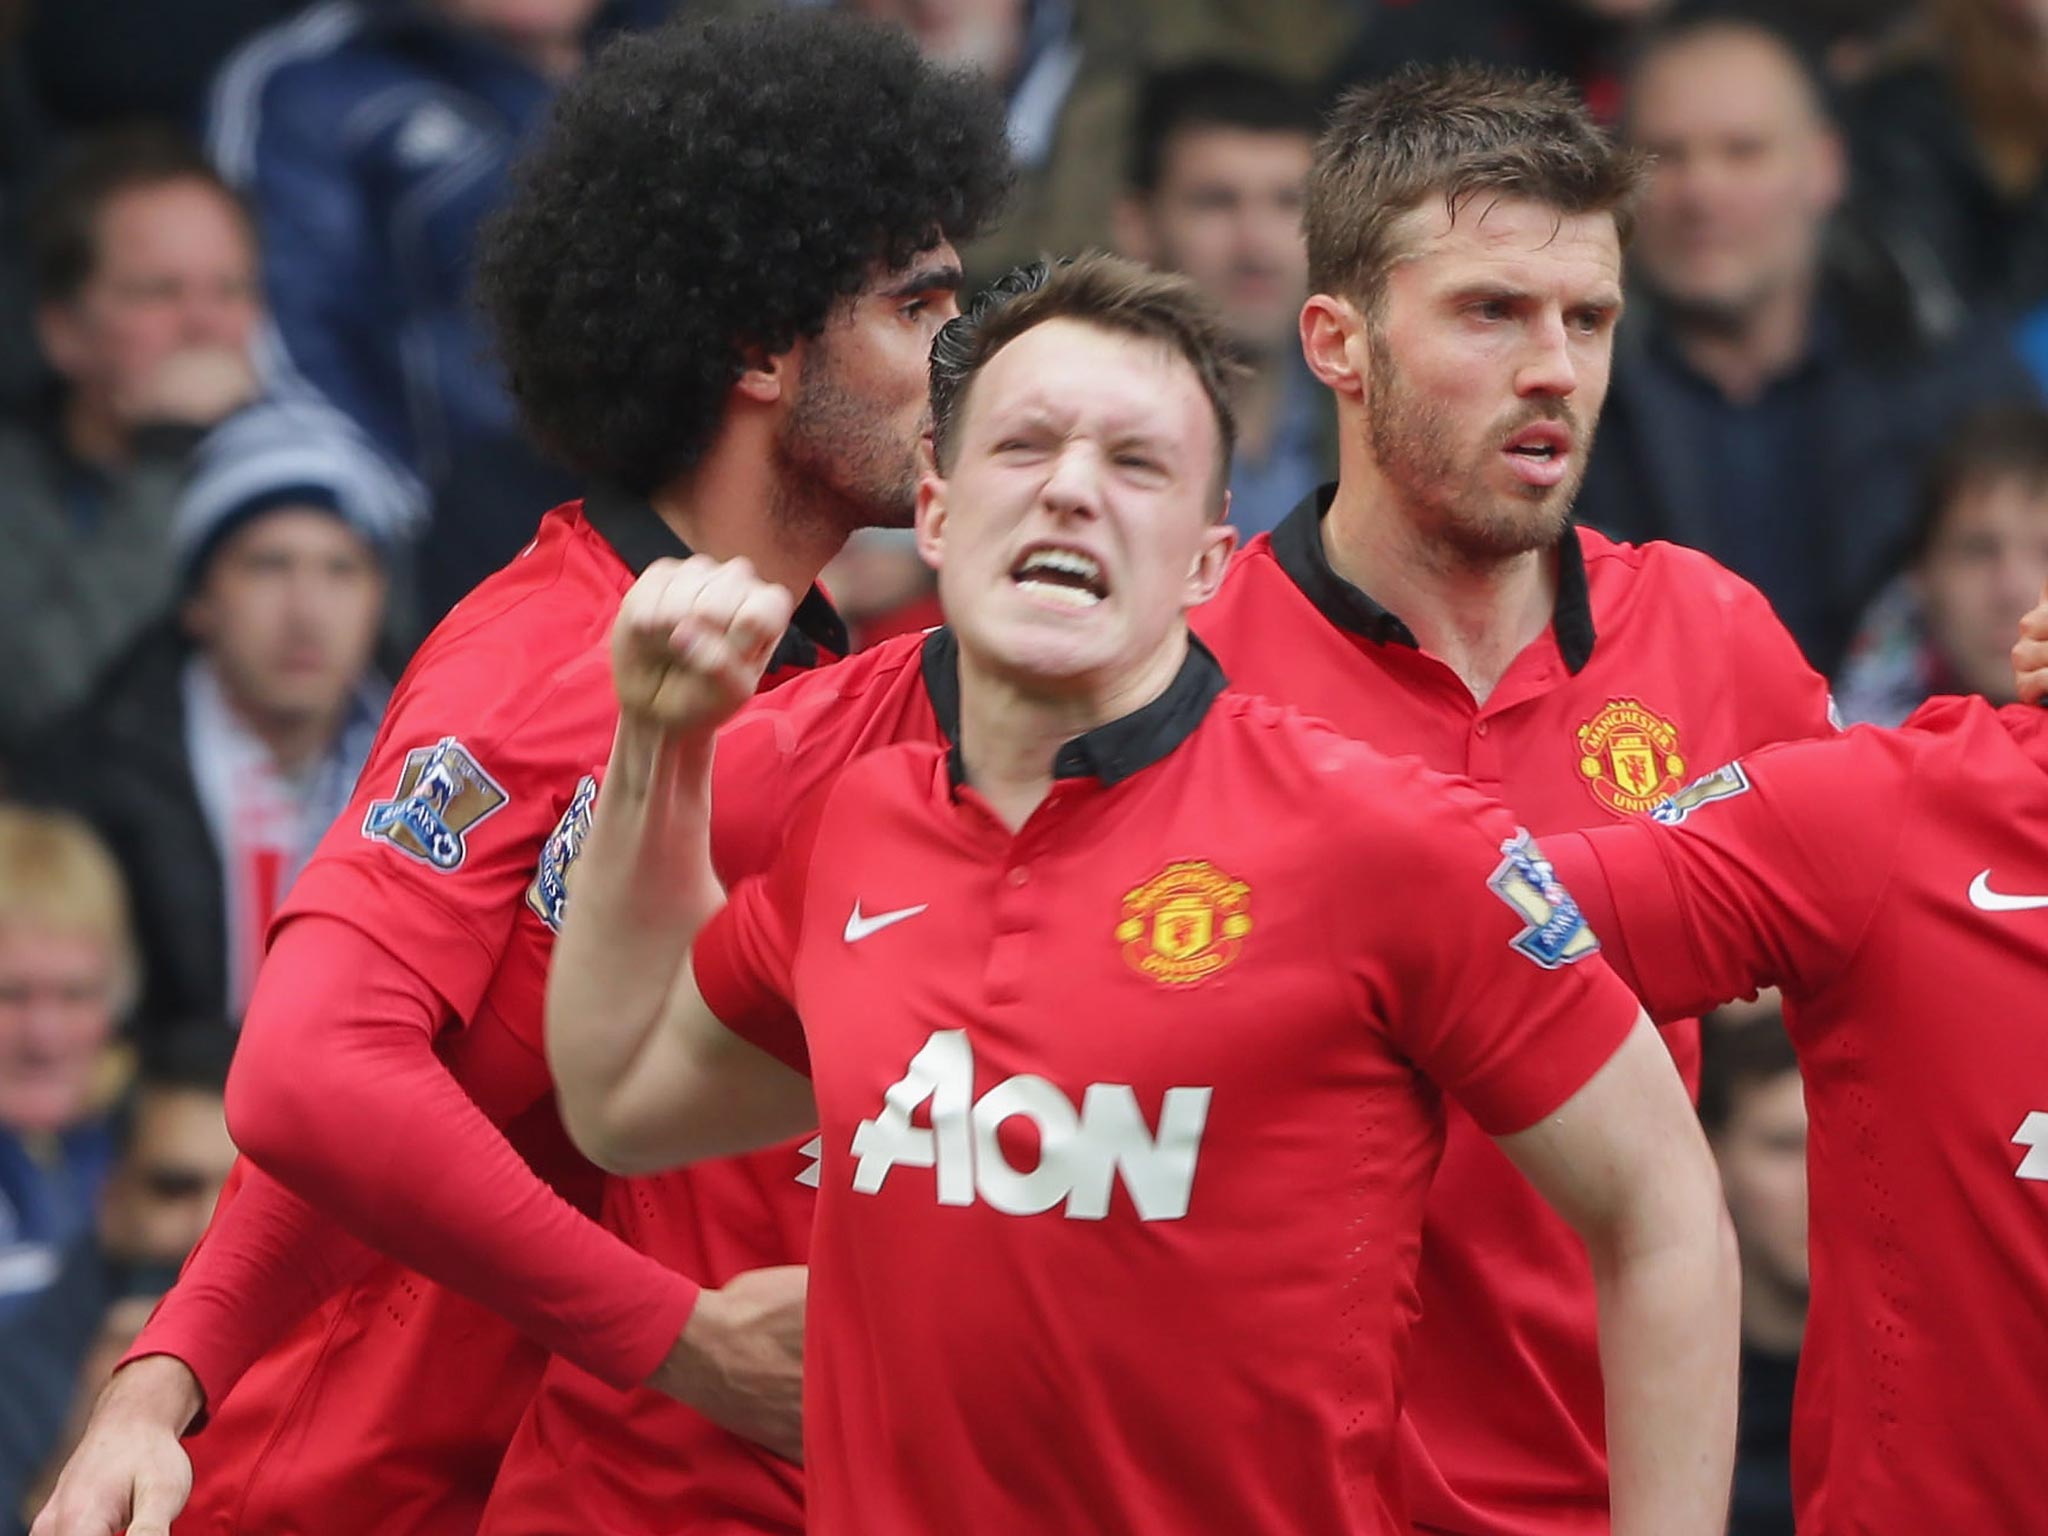 Phil Jones celebrates scoring for Manchester United in the 3-0 victory over West brom